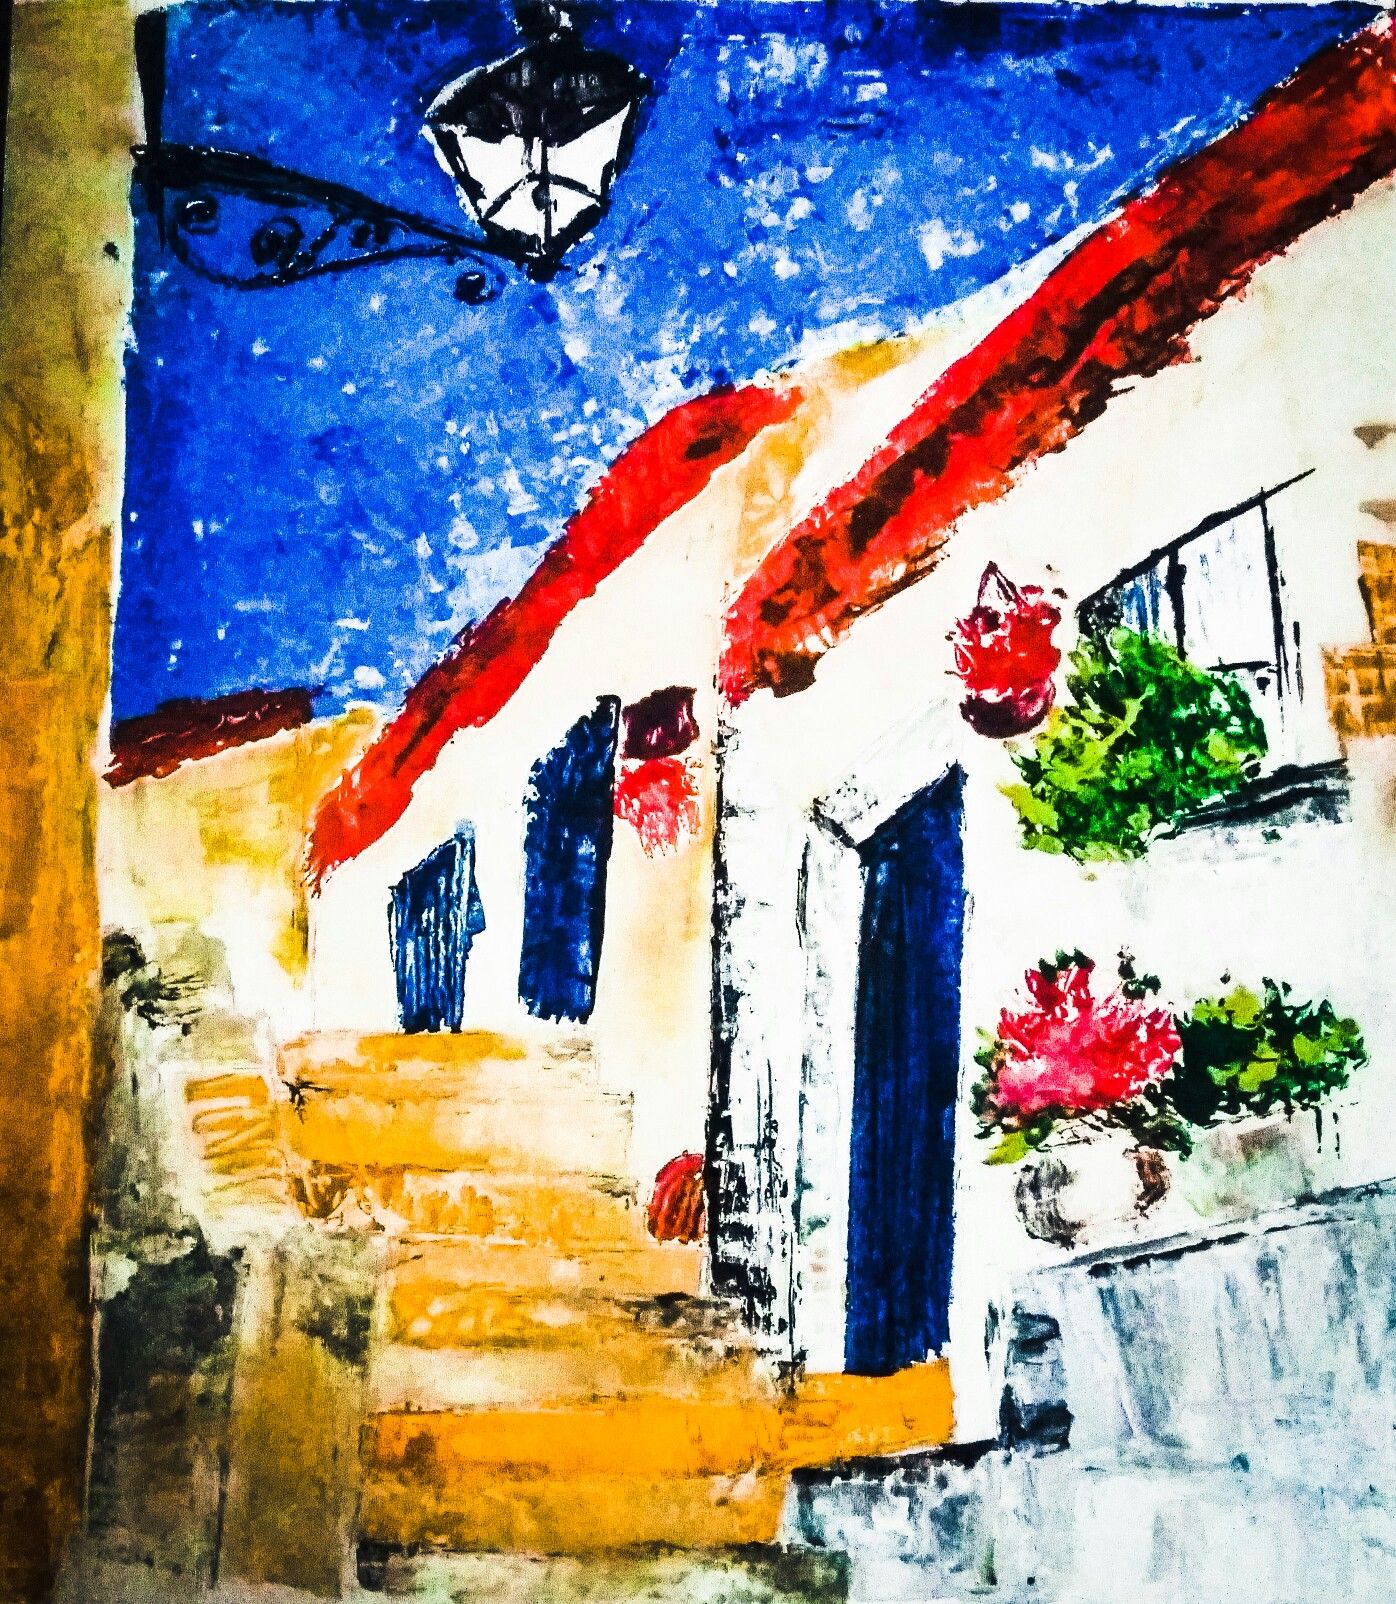 Another knife painting...painted a random street Colors used ...